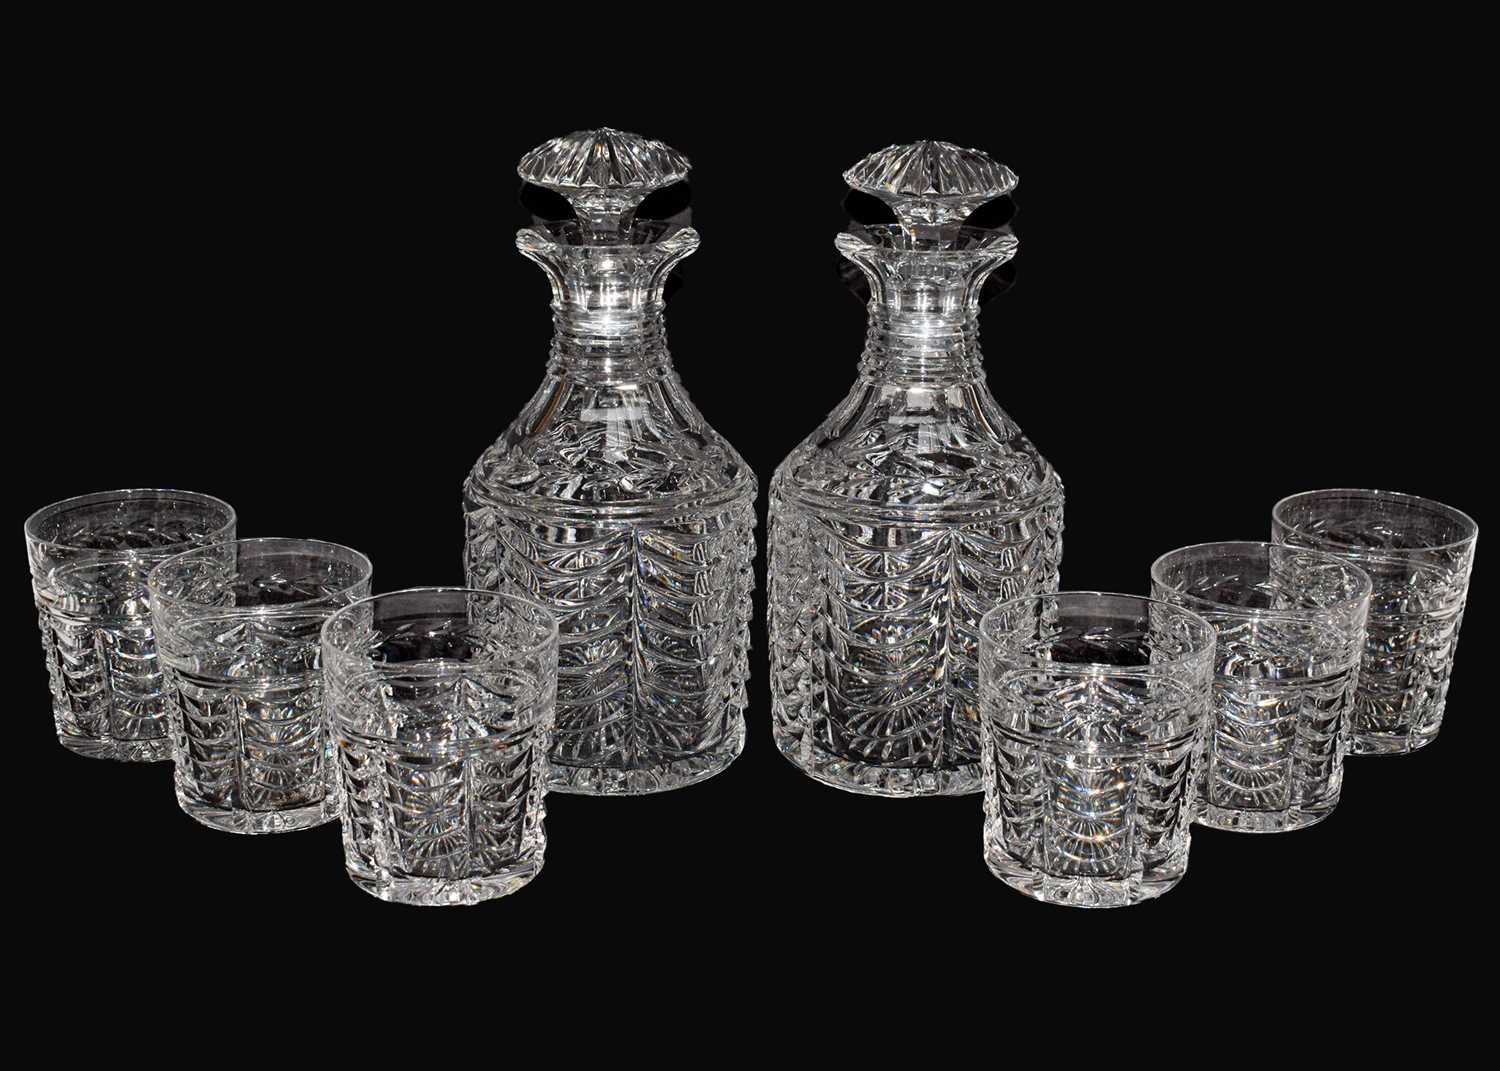 A part suite of Stuart crystal, including a pair of decanters and six tumblers